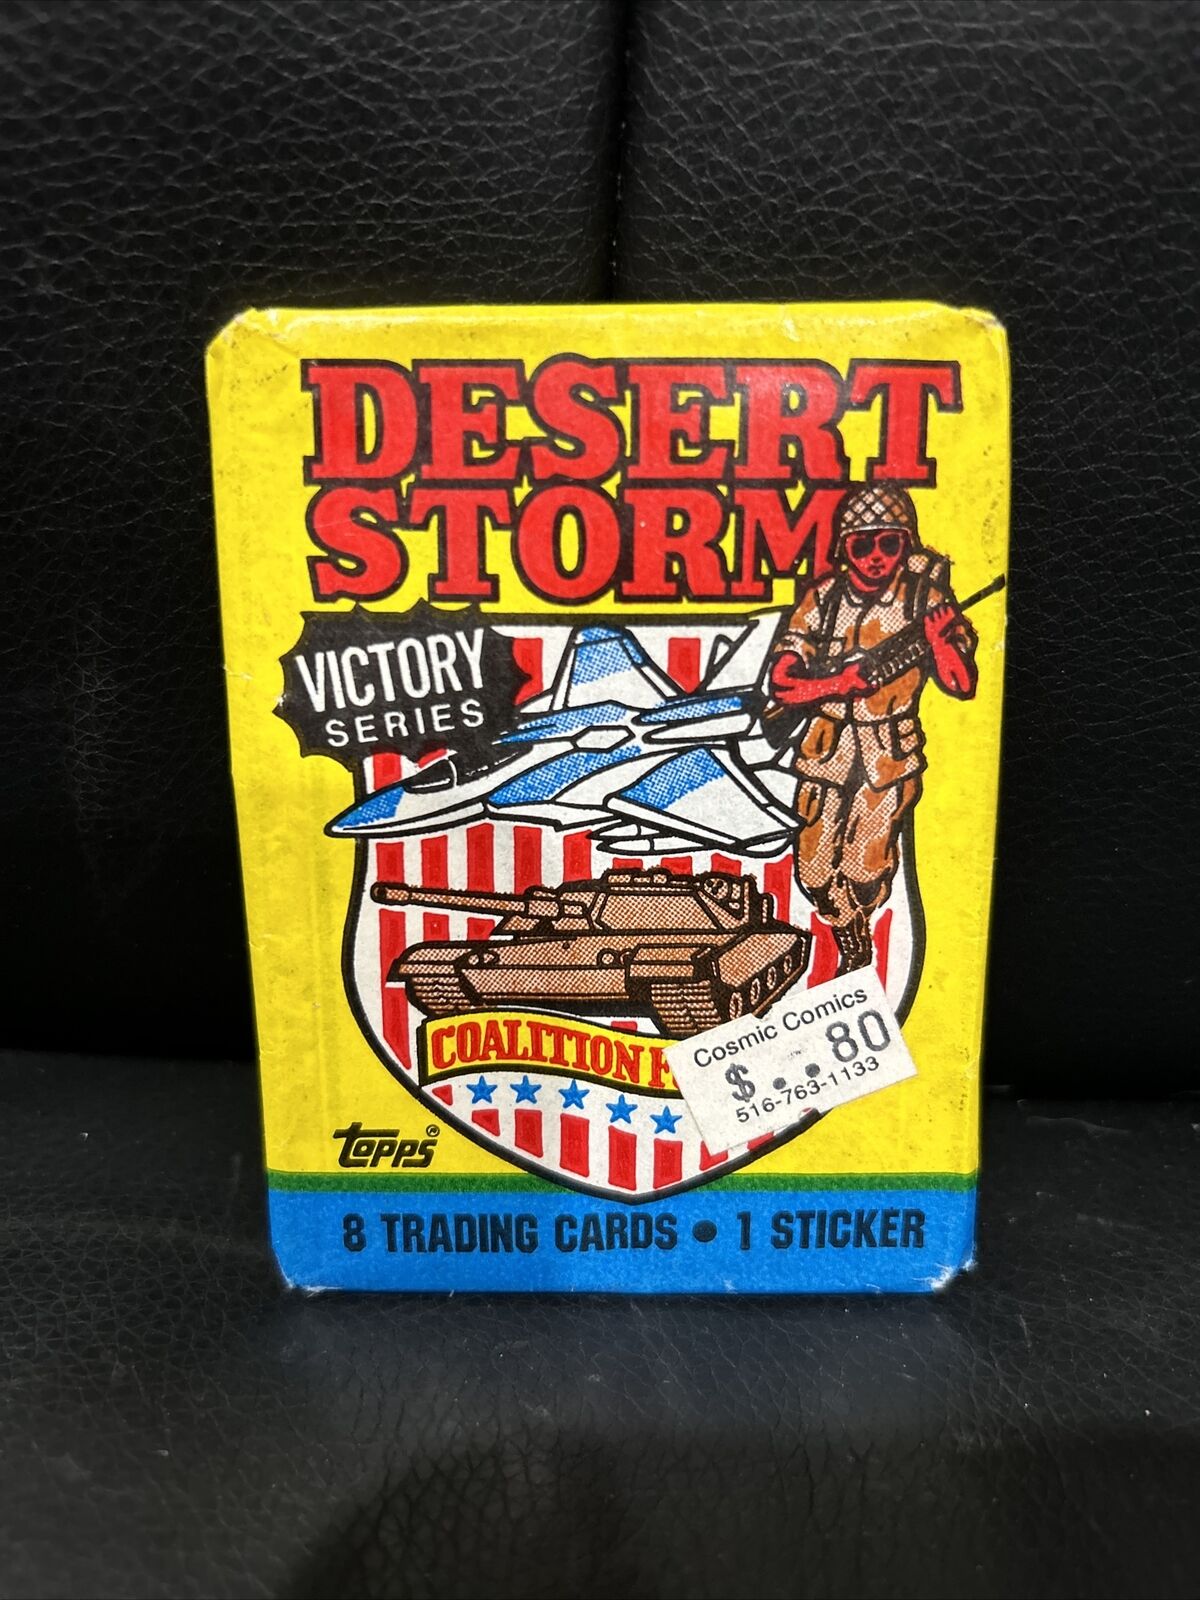 1991 Topps Desert Storm Trading Cards Unopened Wax Pack - Victory Series -